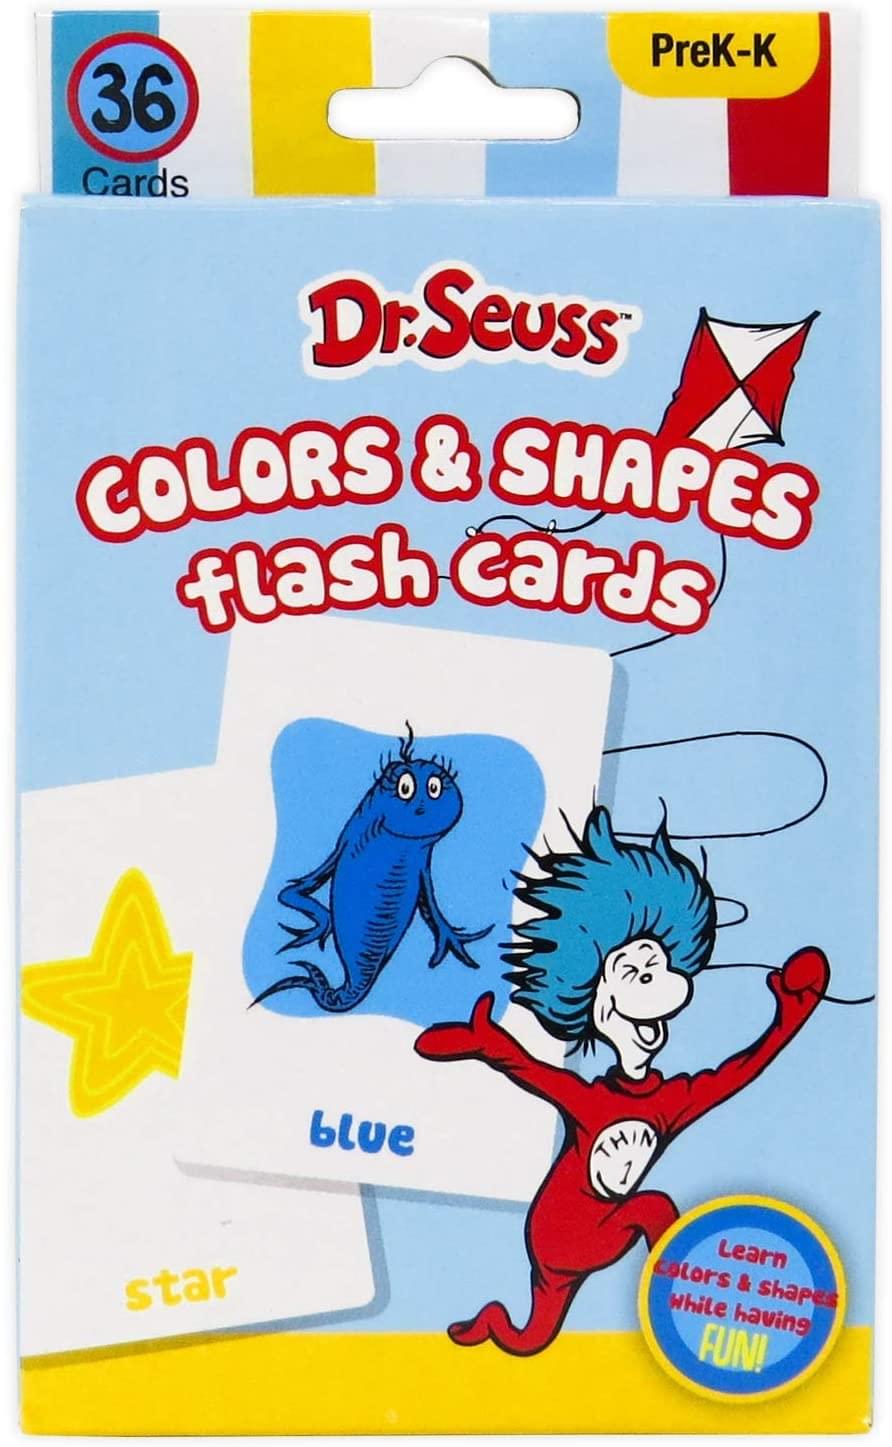 Dr. Seuss 4-in-1 Educational Flash Cards Value Pack